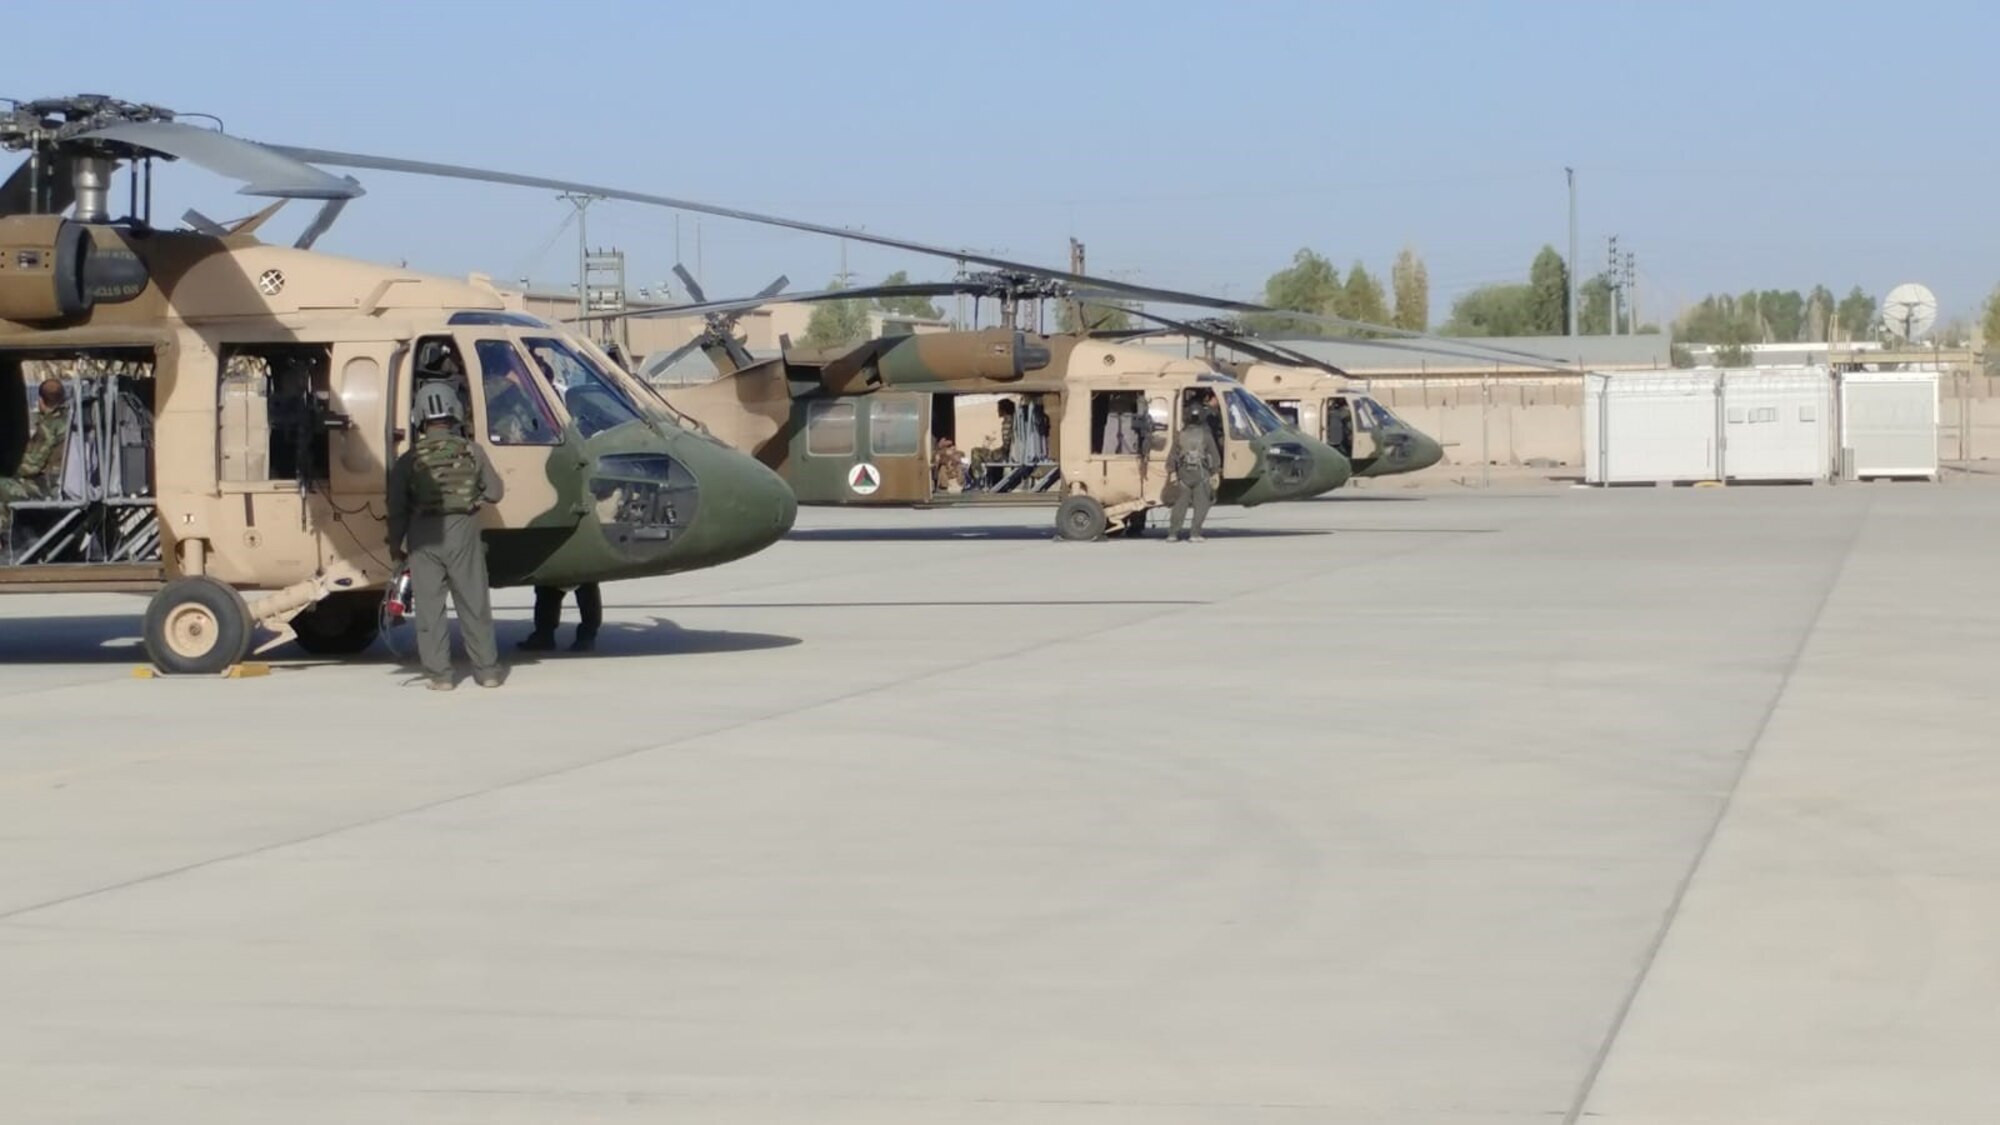 CAMP SHORAB, Afghanistan (July 10, 2018) --  Afghan Air Force (AAF) UH-60 crews prepare the aircraft before going out on the first operational mission July 10, 2018, while deployed to Camp Shorab, Afghanistan. The mission provided transportation to 22 passengers while providing area familiarization for the pilots in Helmand province. (U.S. Marine Corps photo by Sgt. Luke Hoogendam)